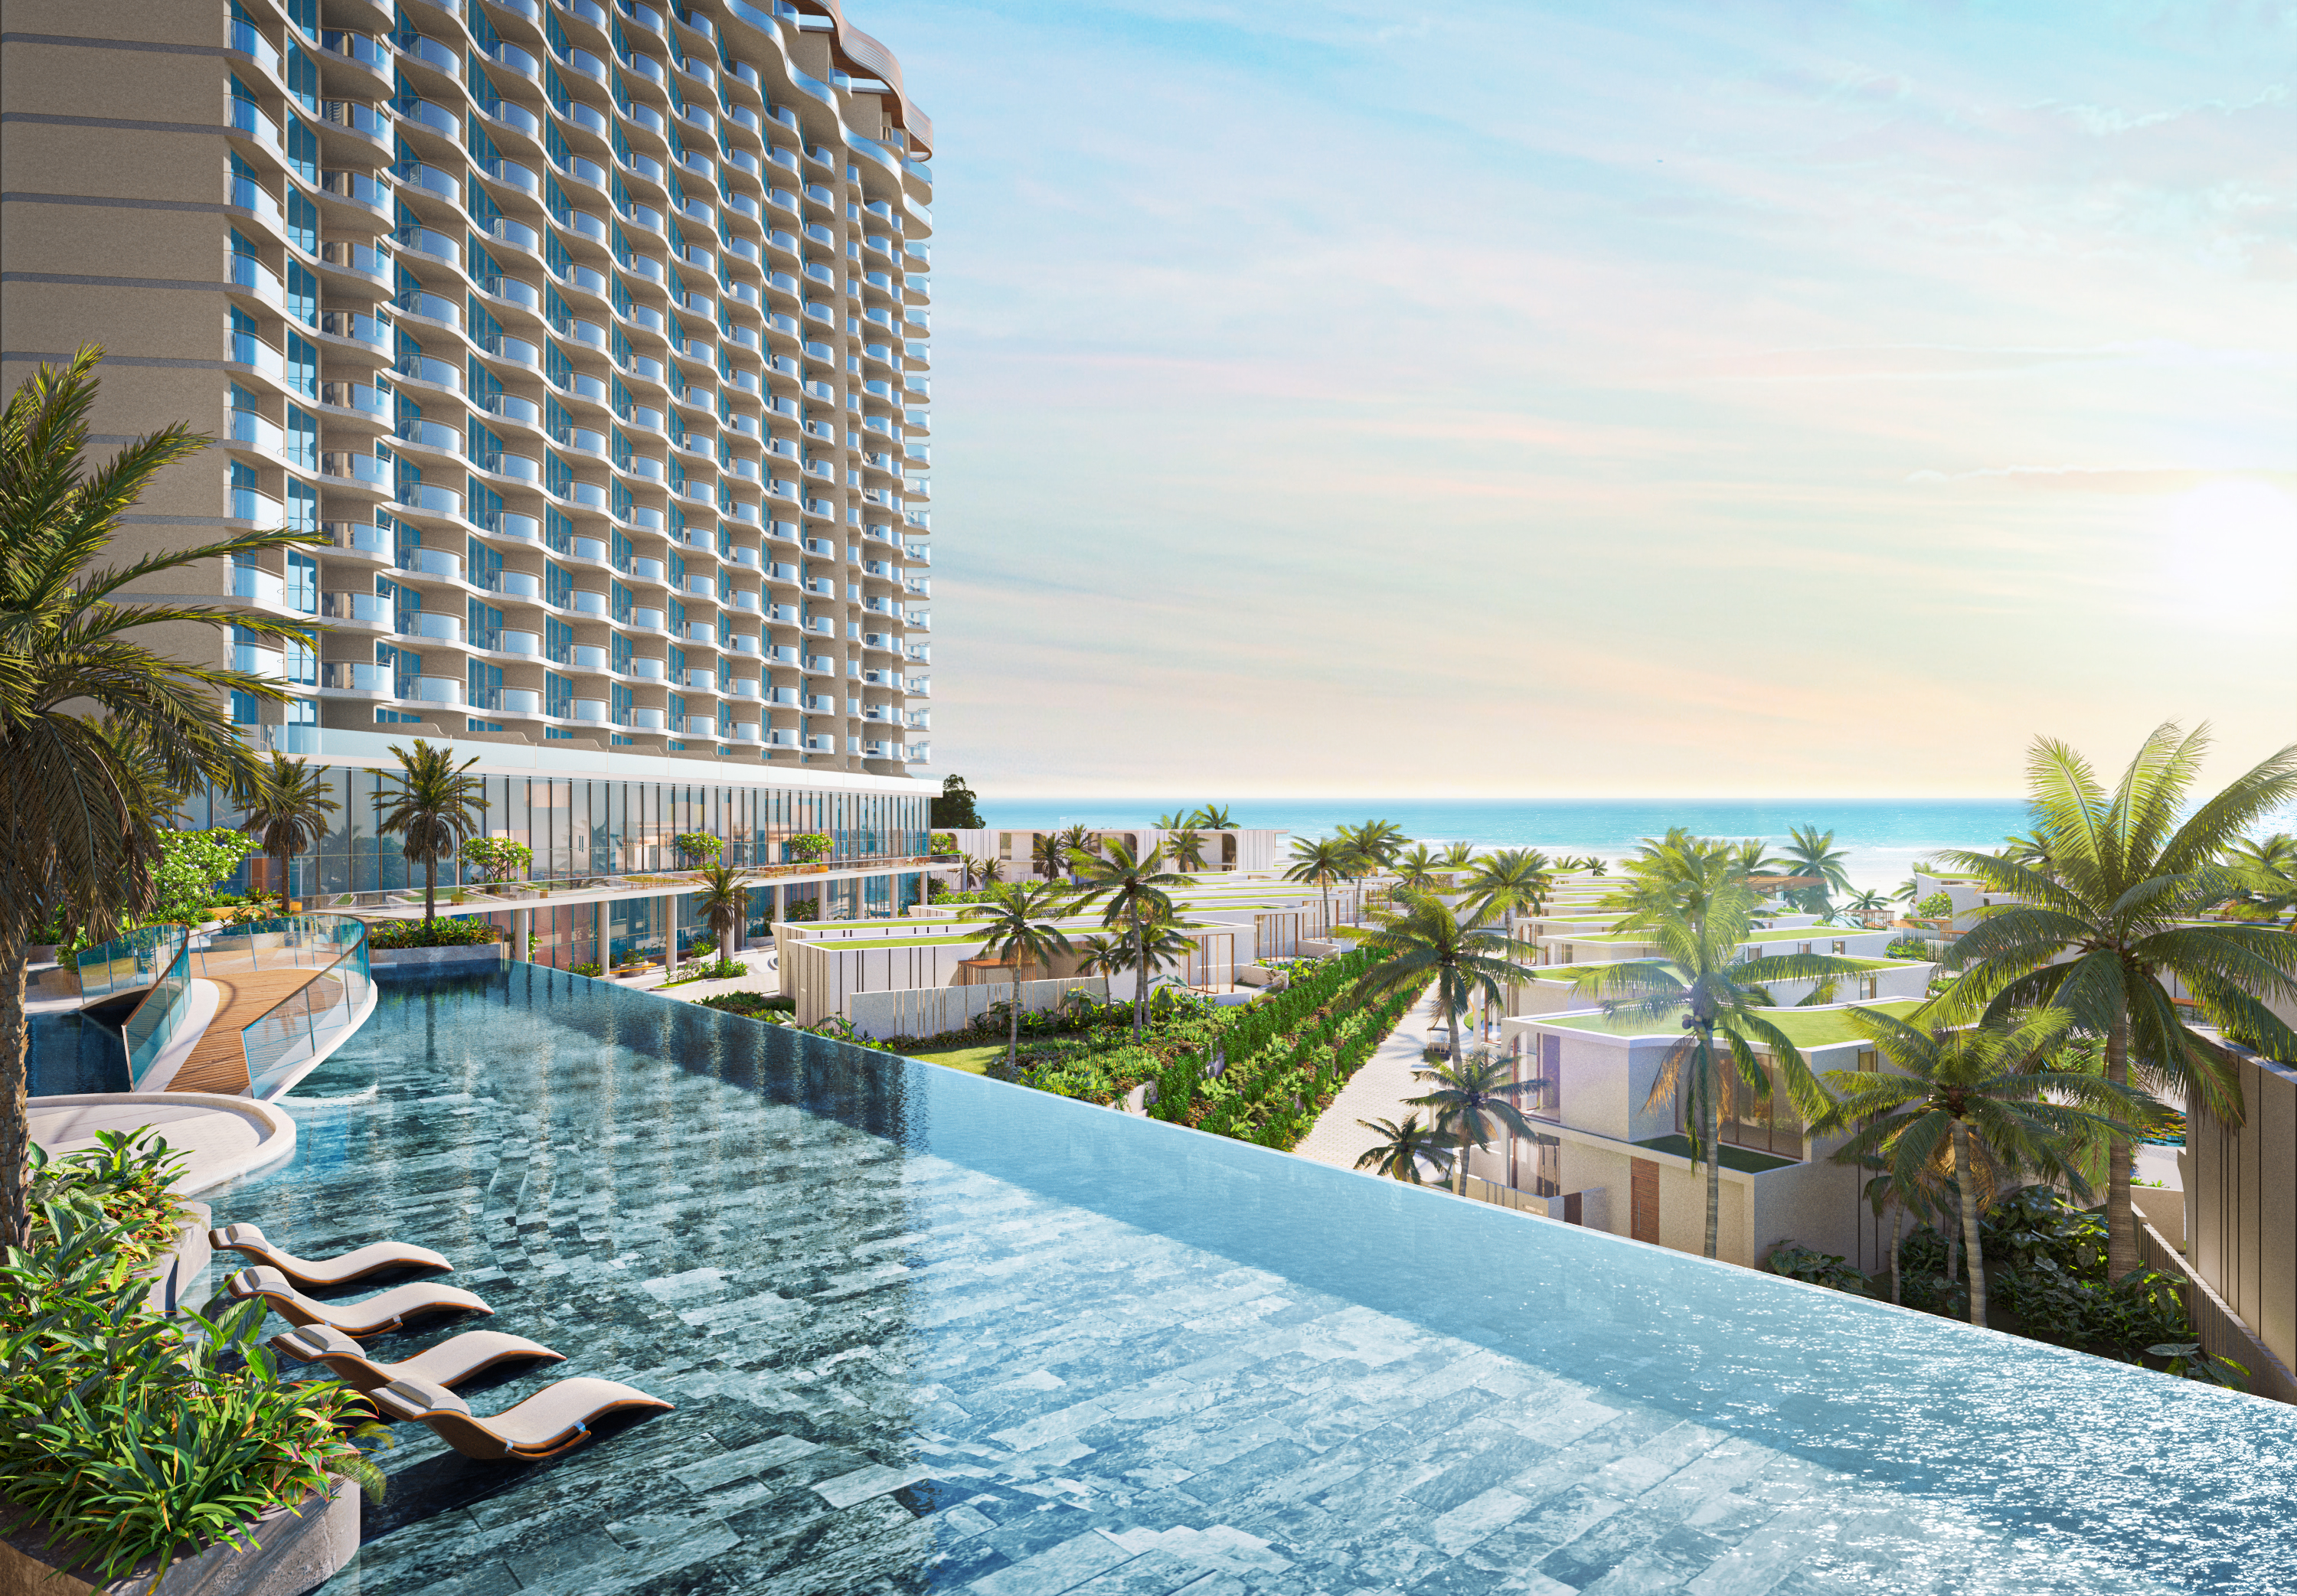 A rare investment opportunity in Southeast Asia’s biggest world-class integrated resort